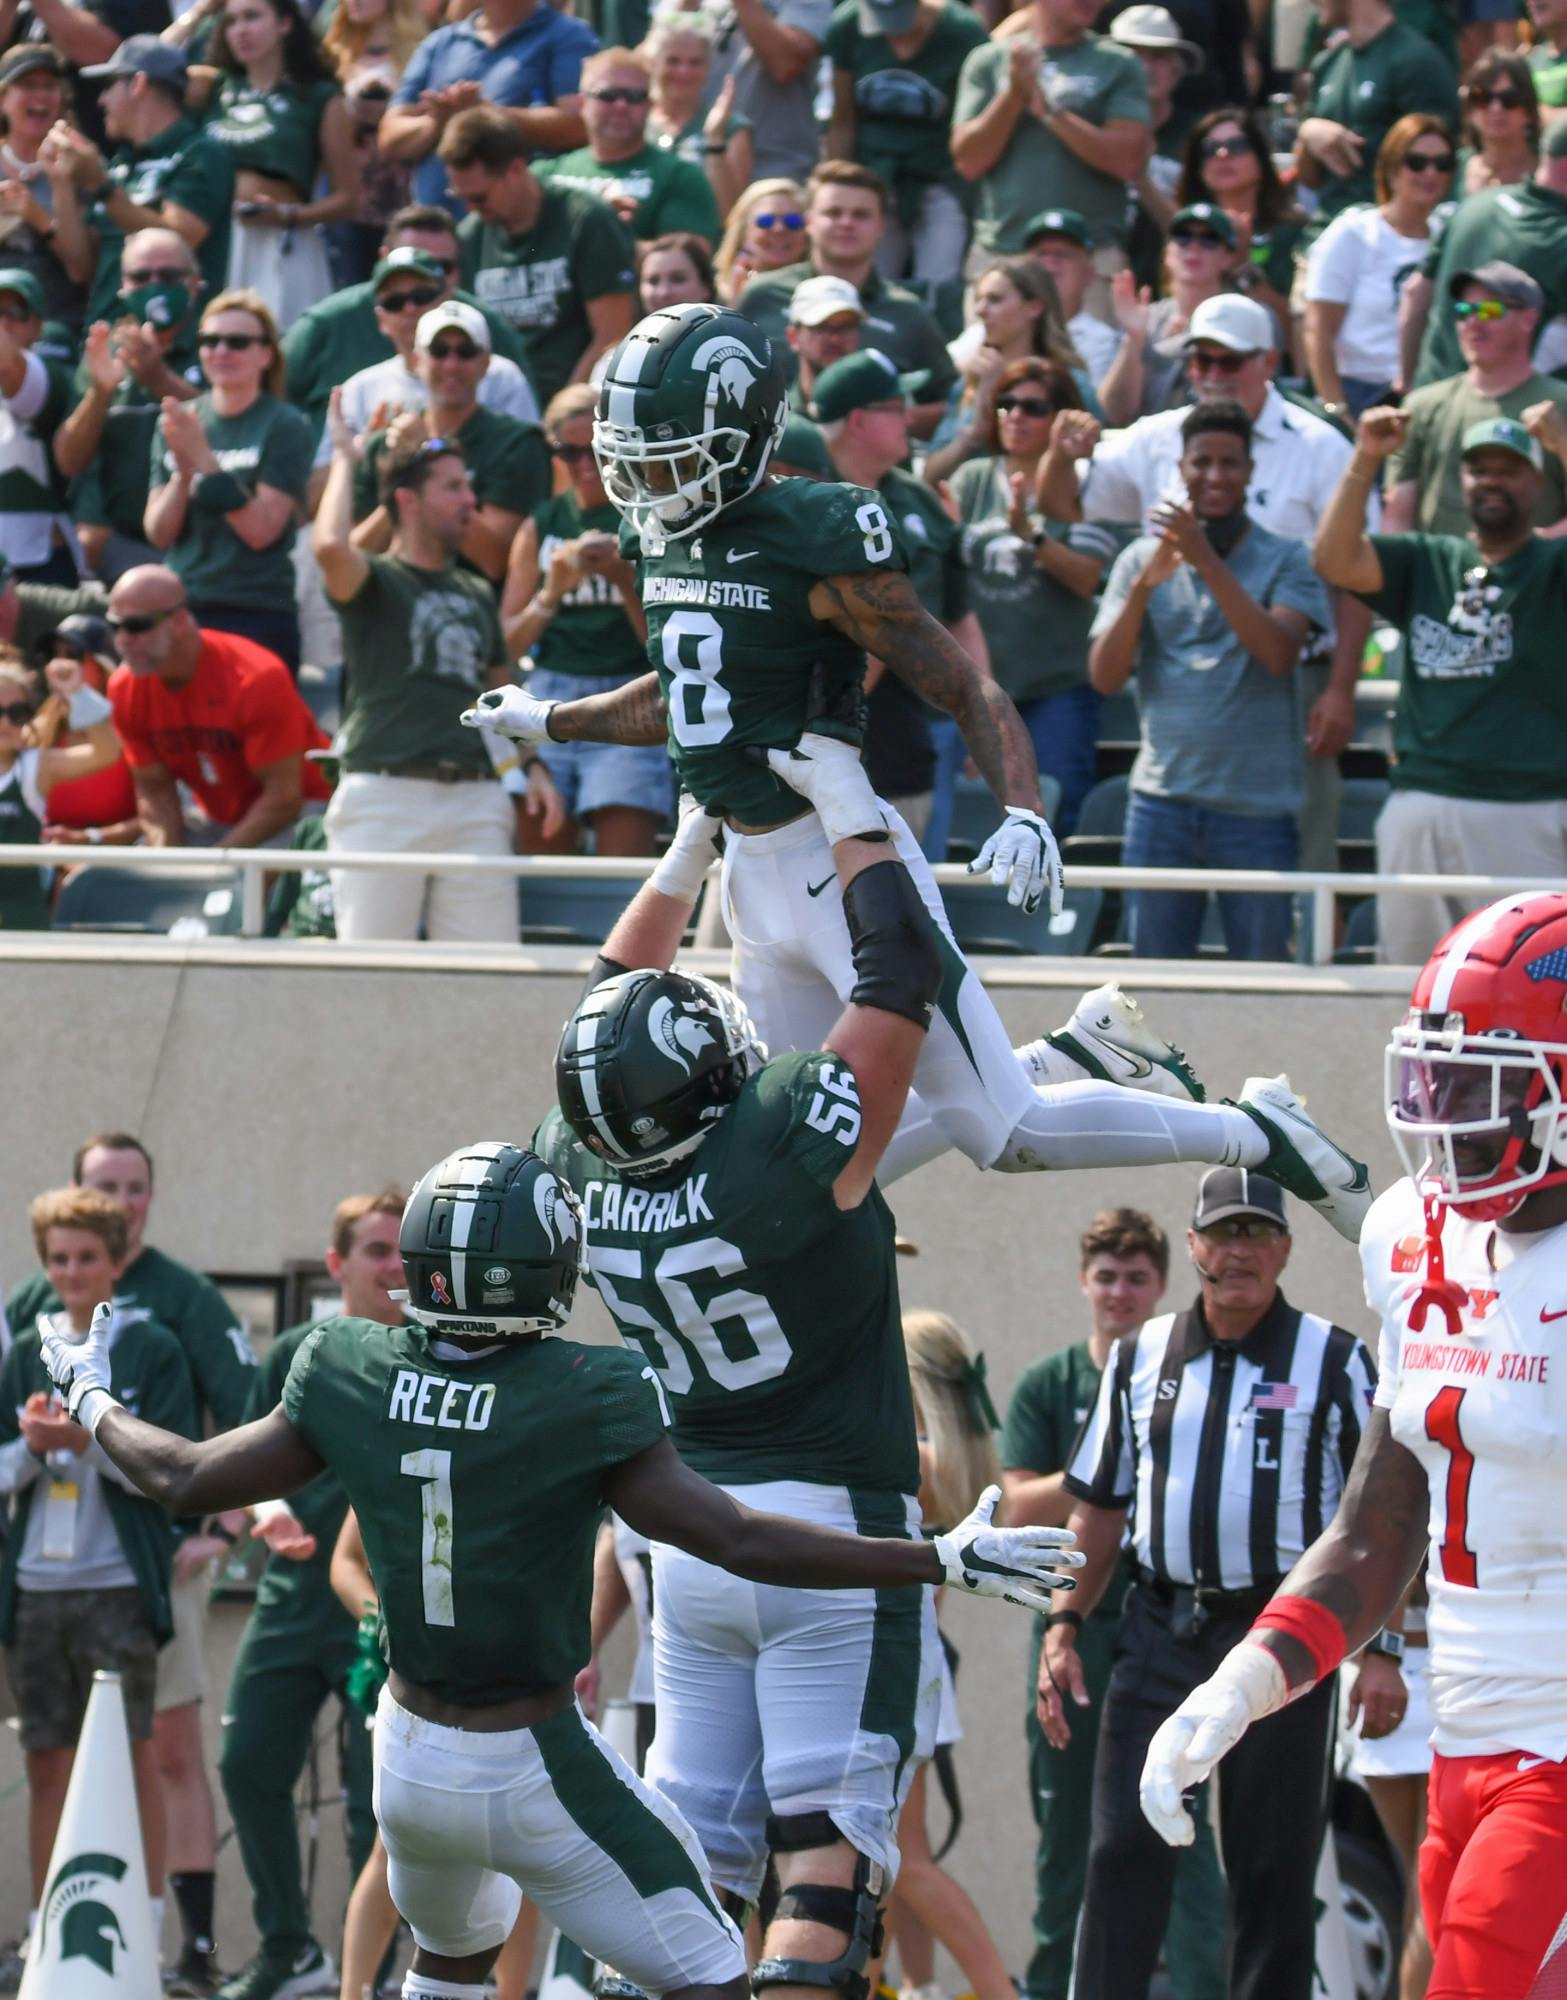 <p>Celebrations ensued as Nailor scores the final touchdown of the game, bringing Michigan State to 42-14 against the Youngstown State Penguins on September 11, 2021. </p>